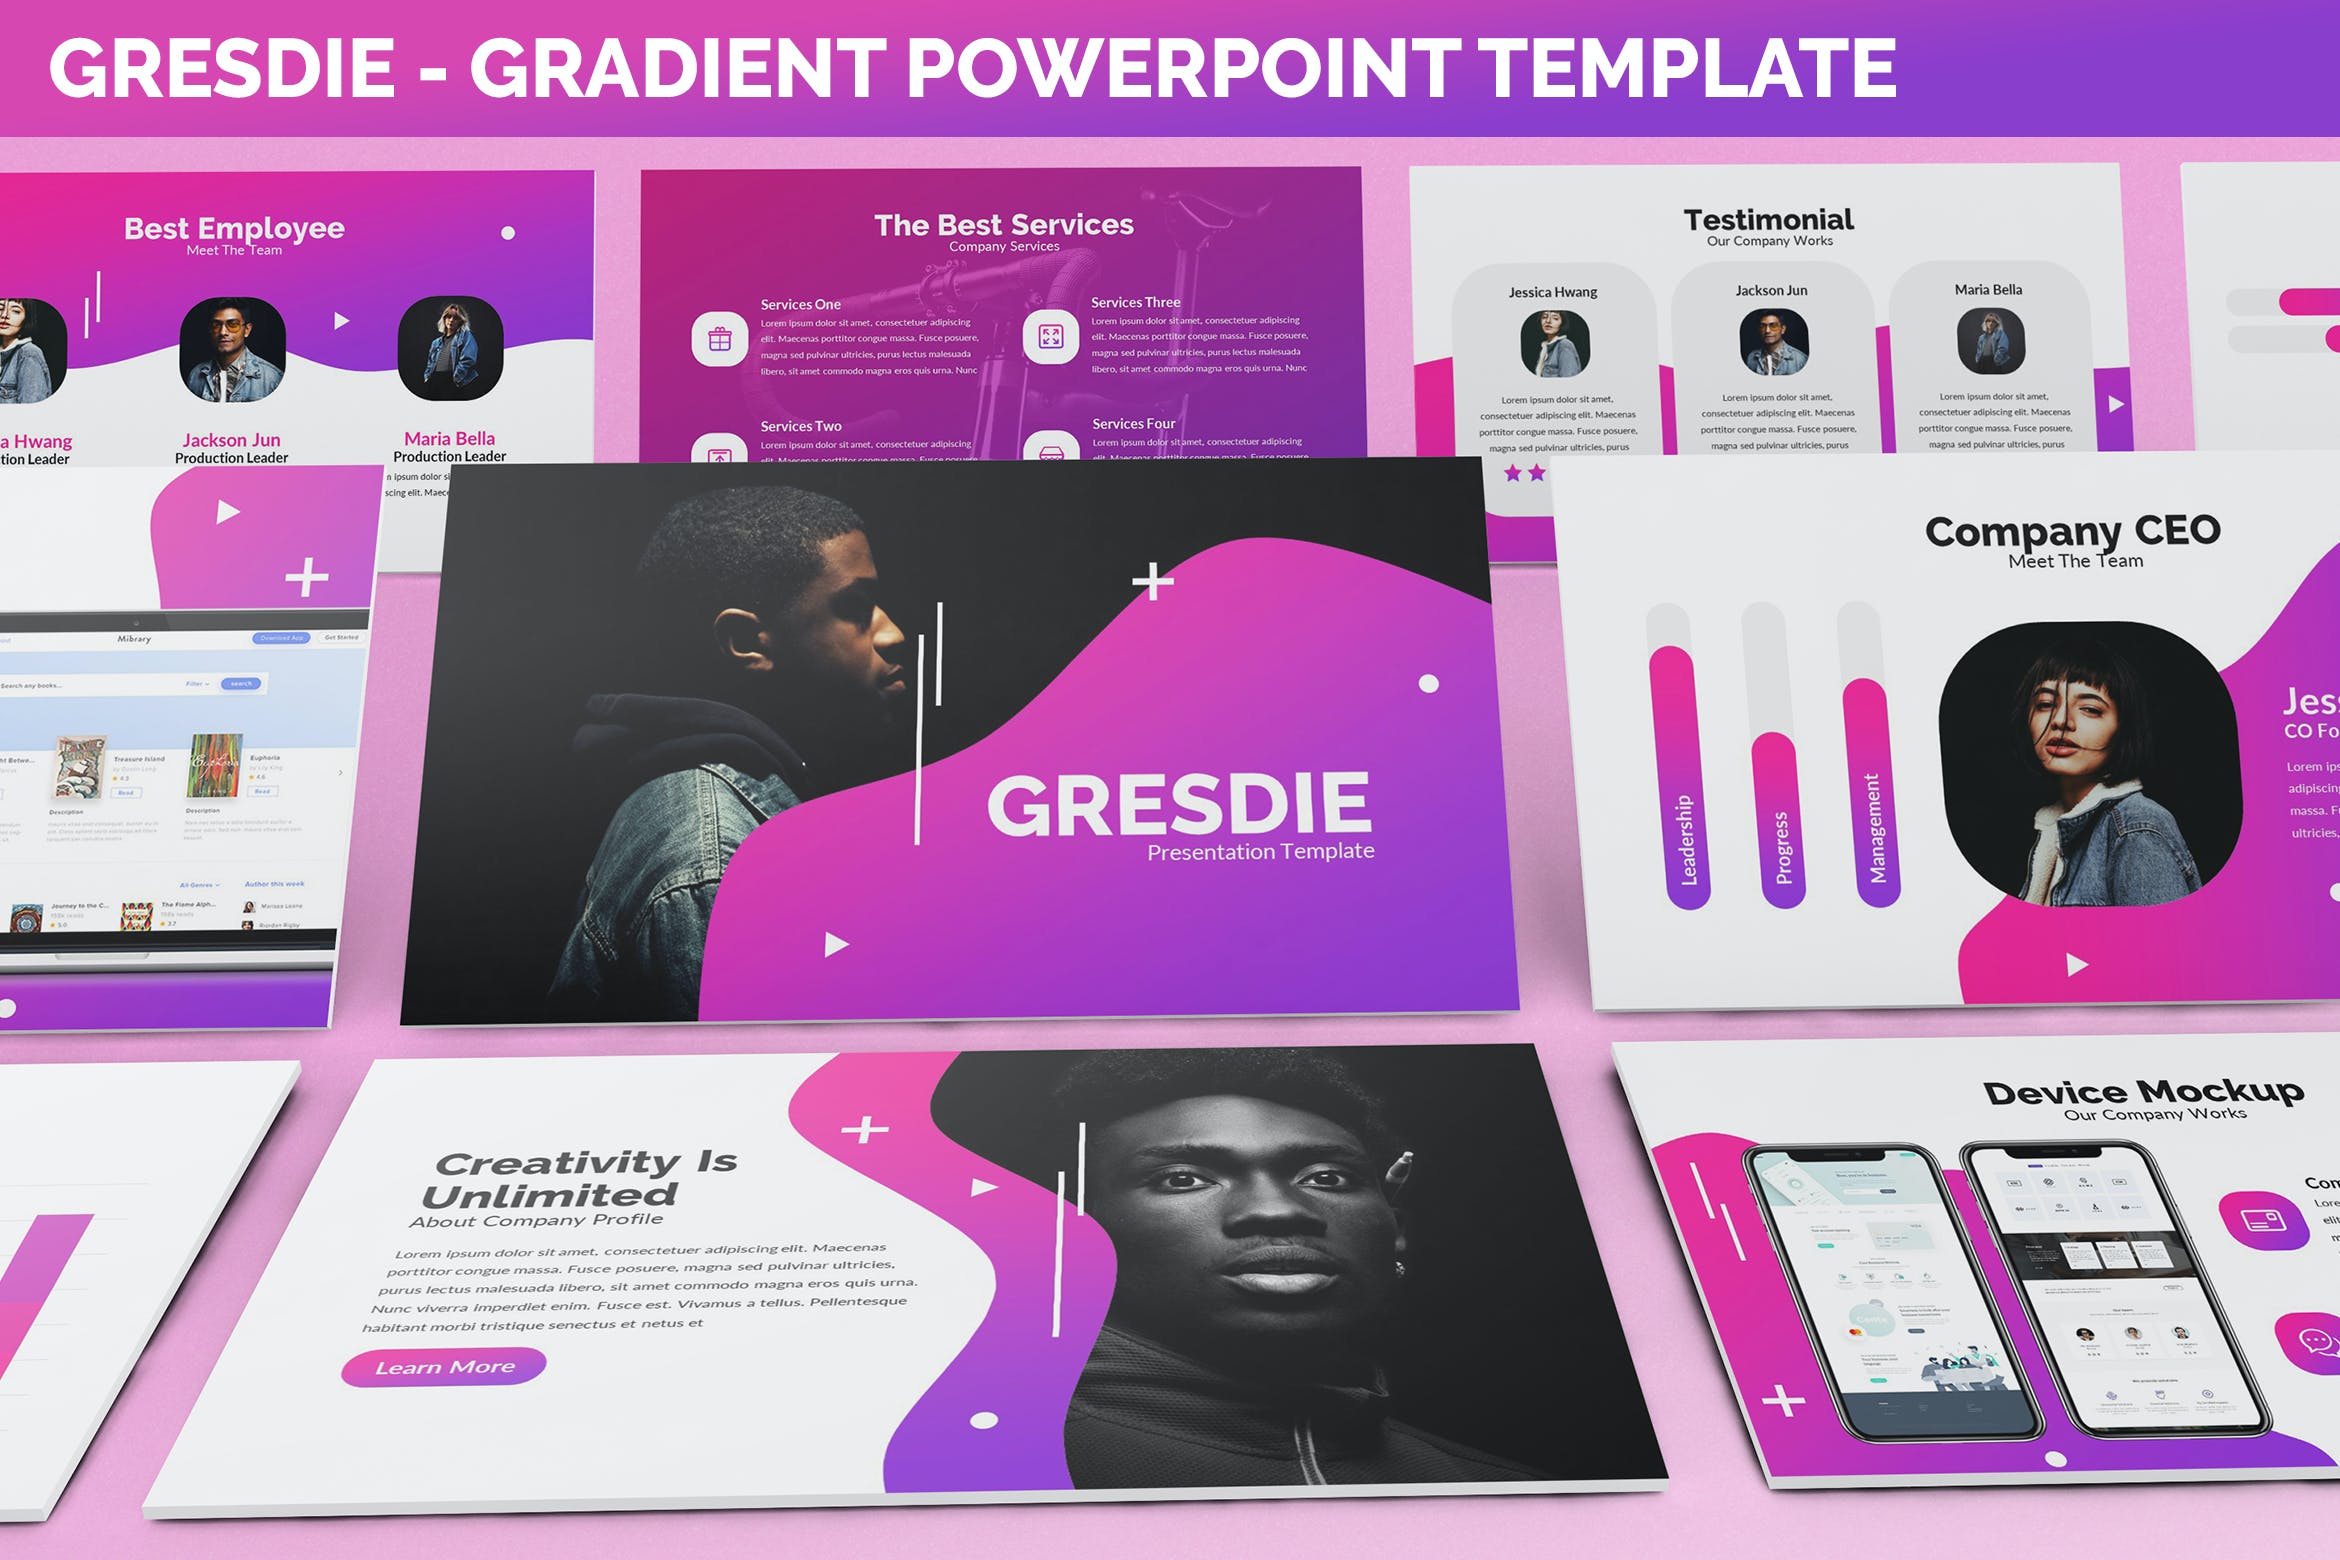 Cover image of Gresdie - Gradient Abstract Powerpoint Template.